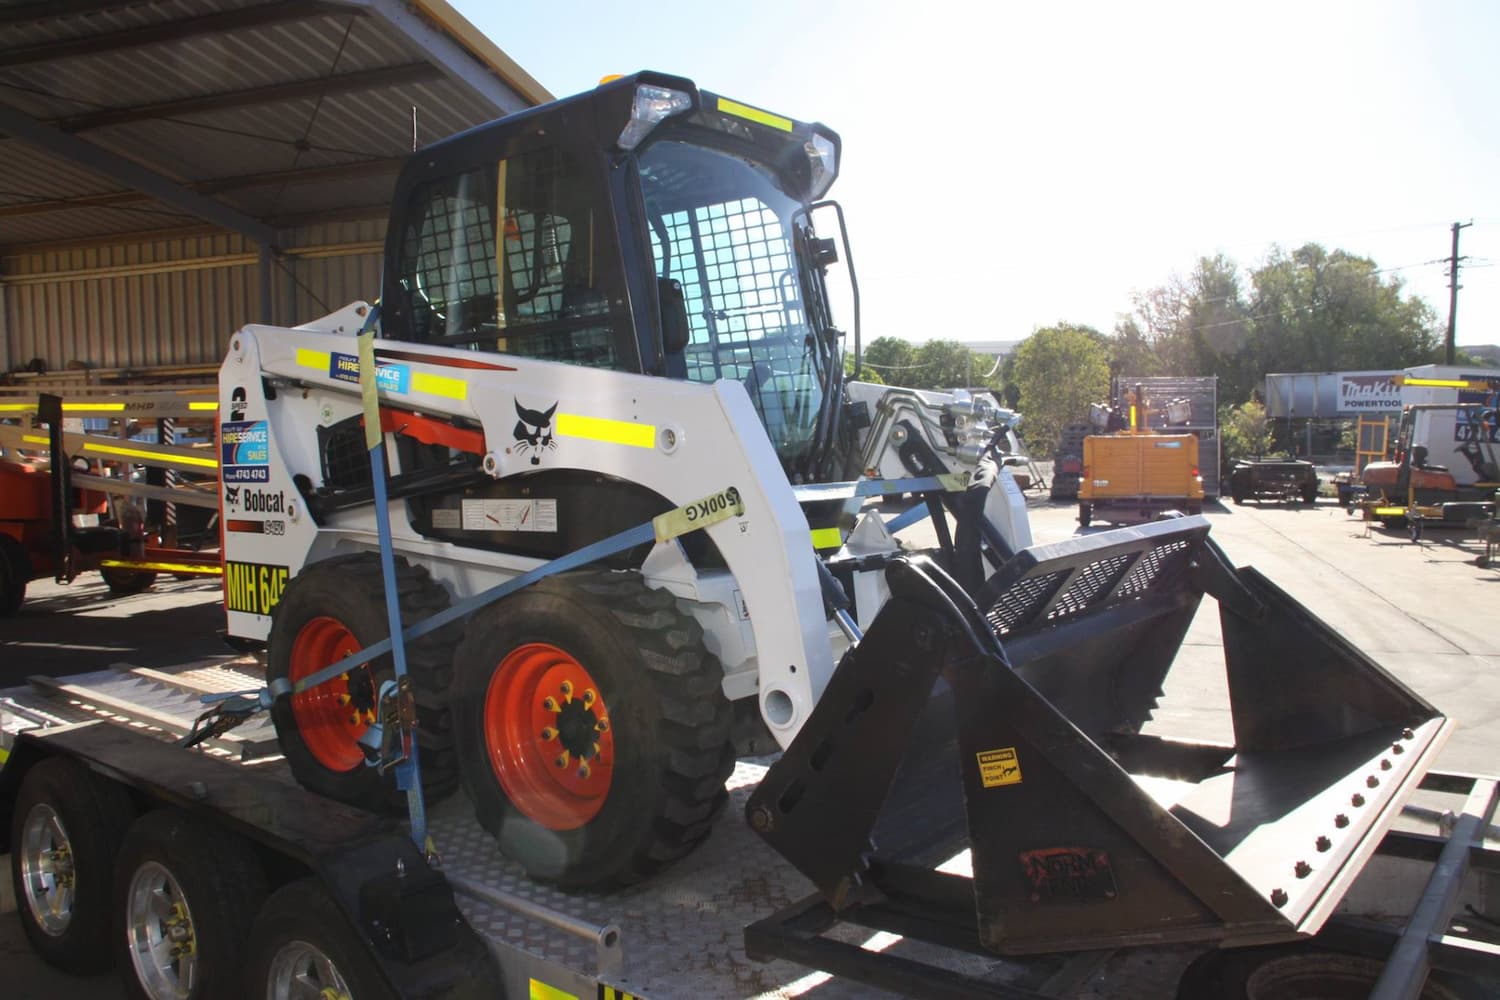 Hire Equipment - Construction Equipment In Mount Isa, QLD